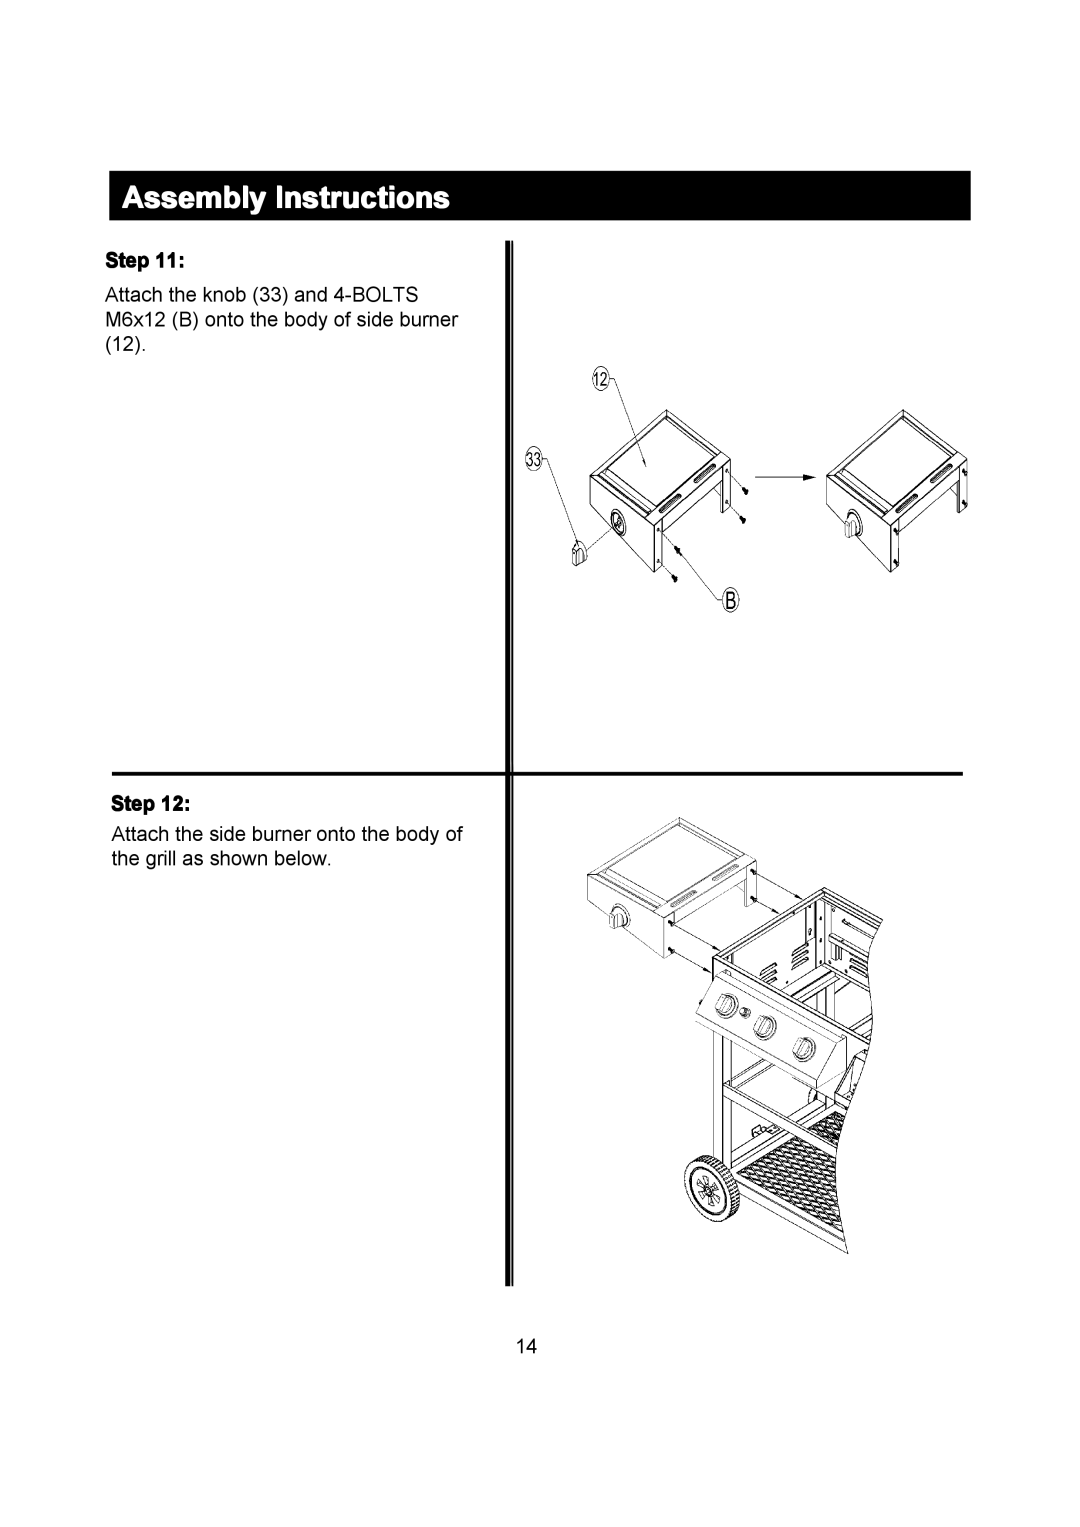 Outdoor Gourmet CG3023E Assembly Instructions, Step, Attach the knob 33 and 4-BOLTS M6x12 B onto the body of side burner 